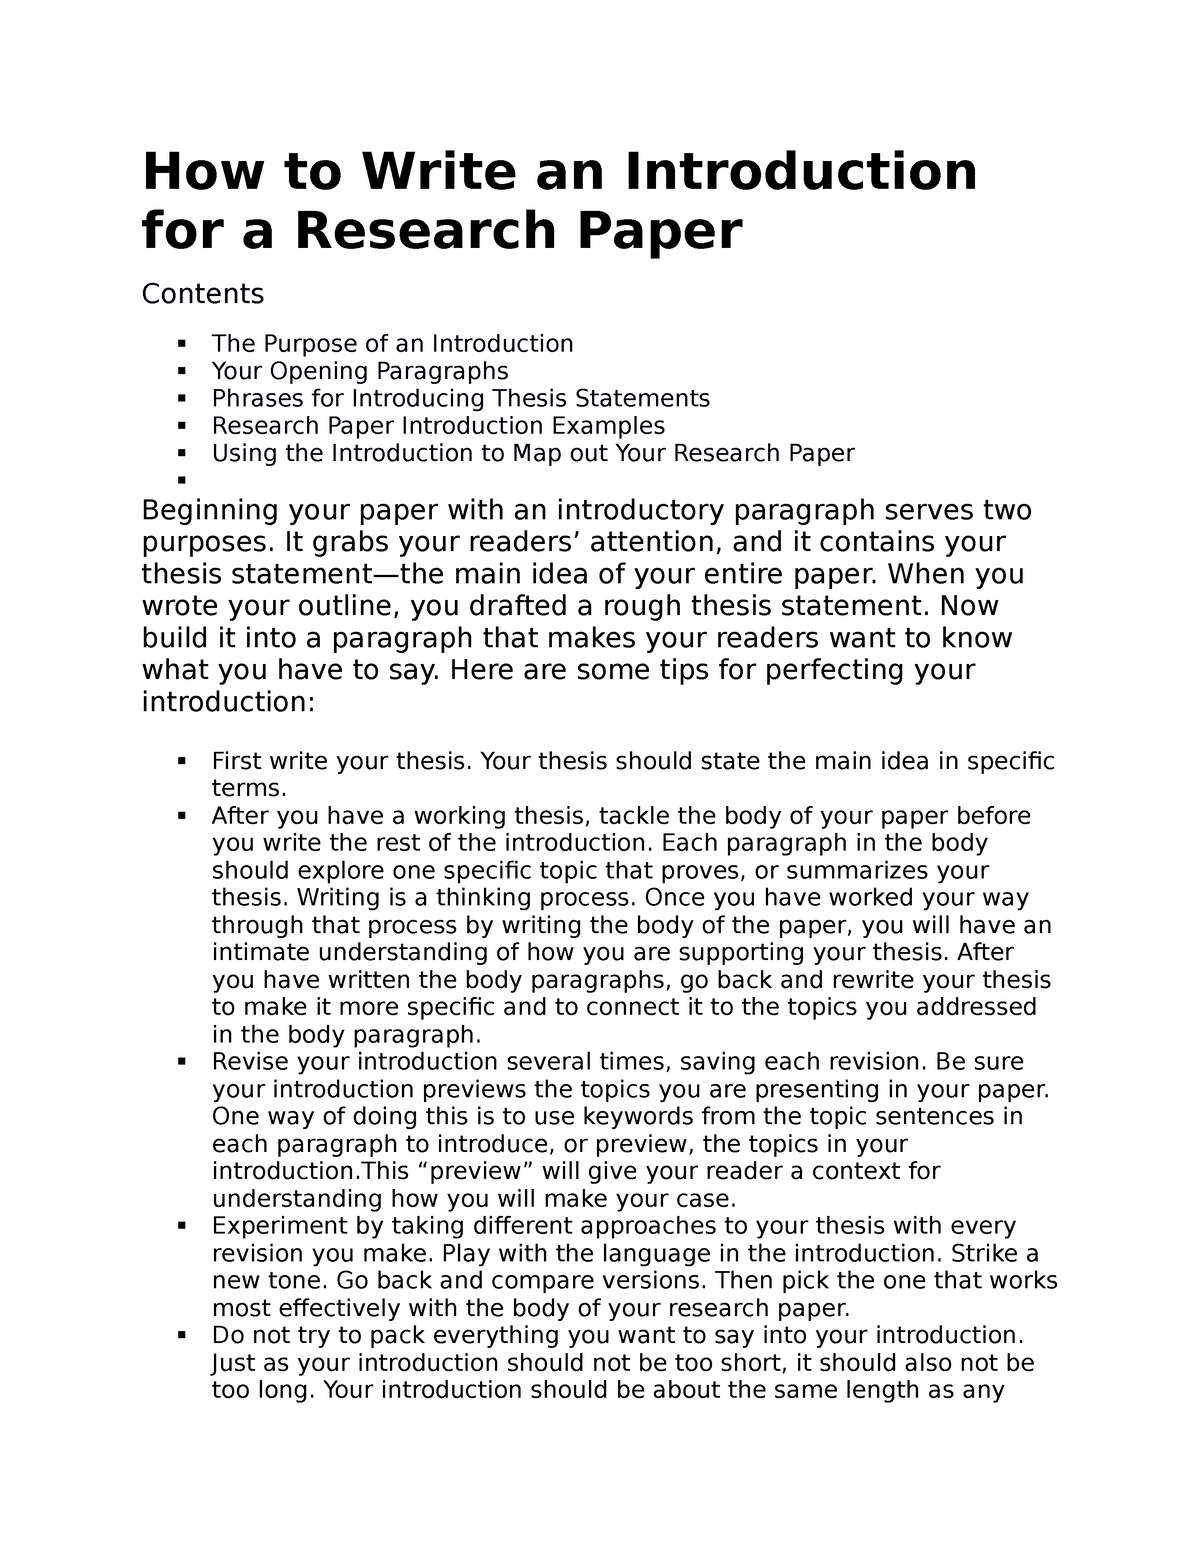 how do you write a research introduction